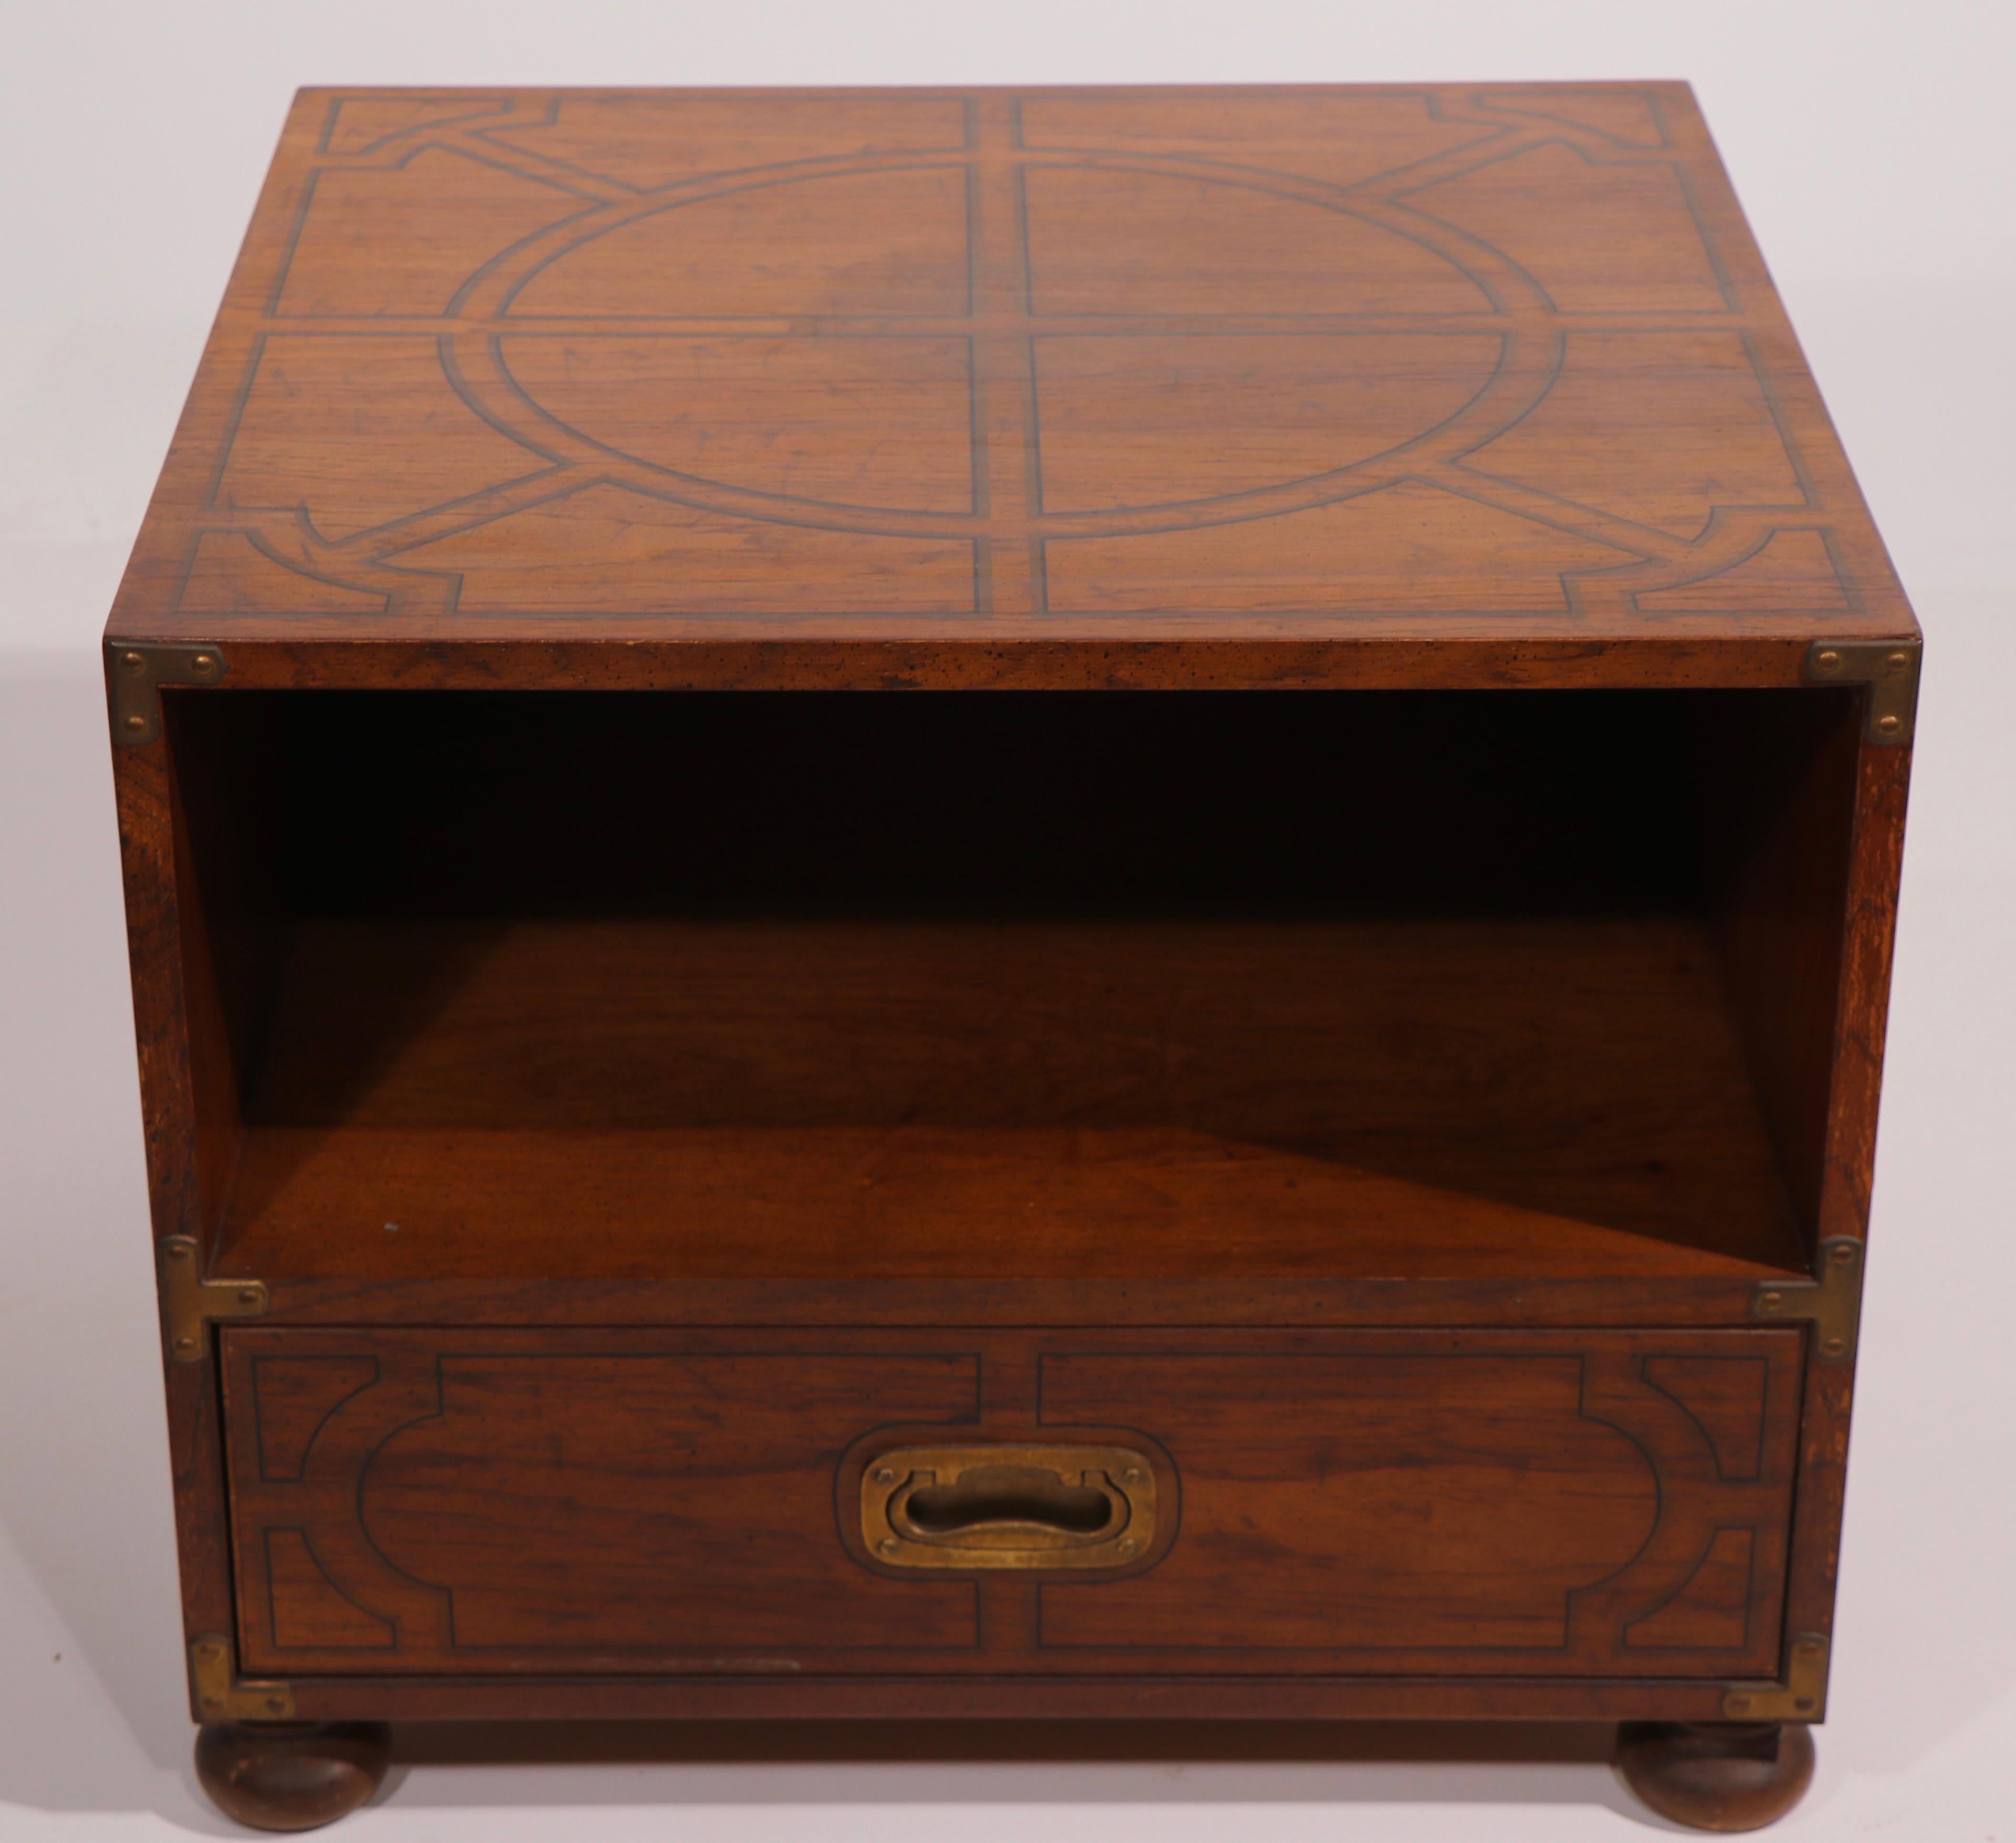 From one of the most stylish line of furniture produced by Drexel, this Oxford square end, or side table is in original, clean and ready to use condition. The table has an open storage space (9.75 in H) over one large drawer. The pecan wood case